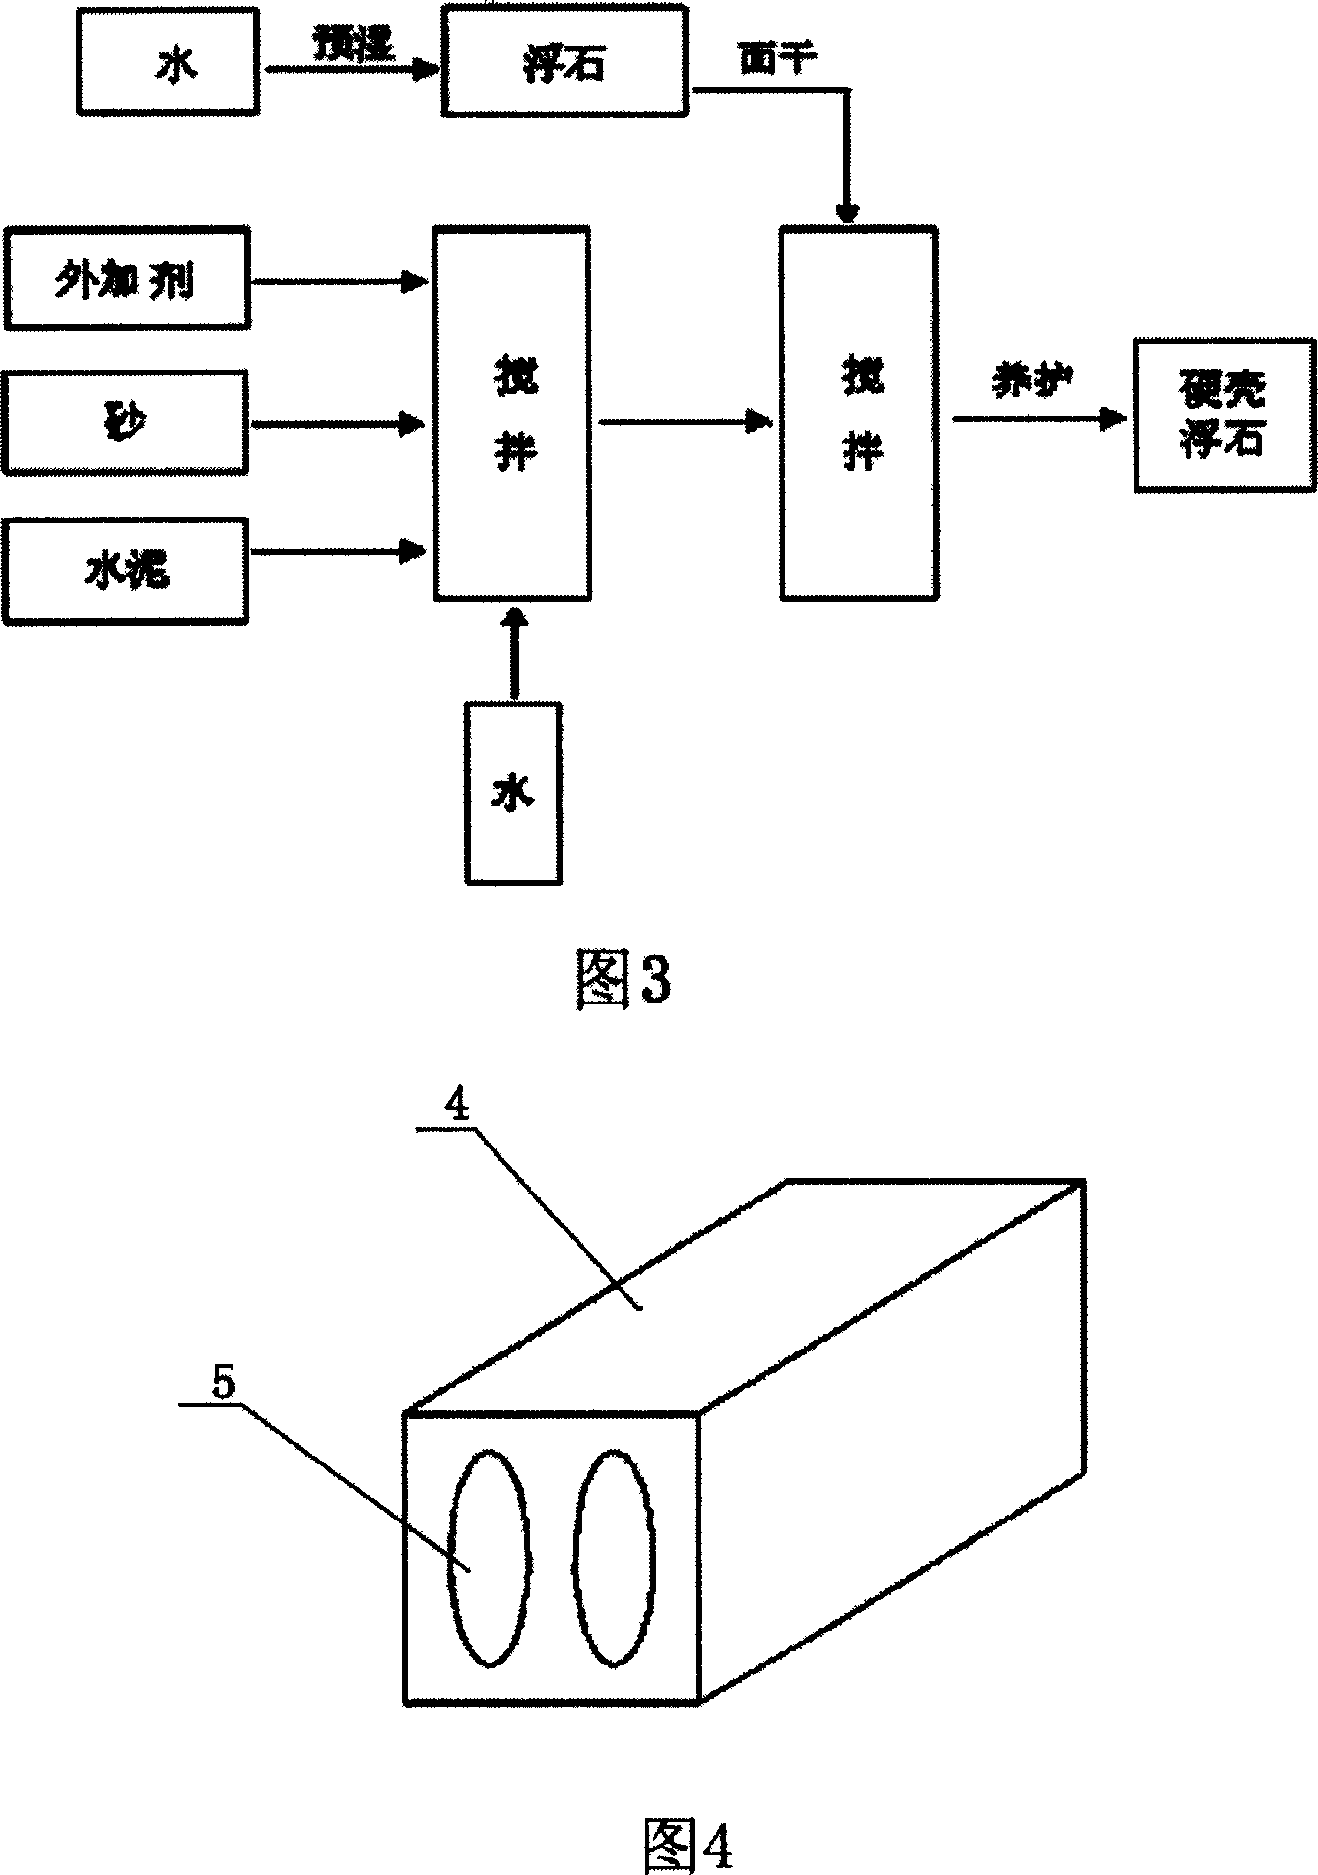 Hard shell pumice concrete, light building block and its preparation method